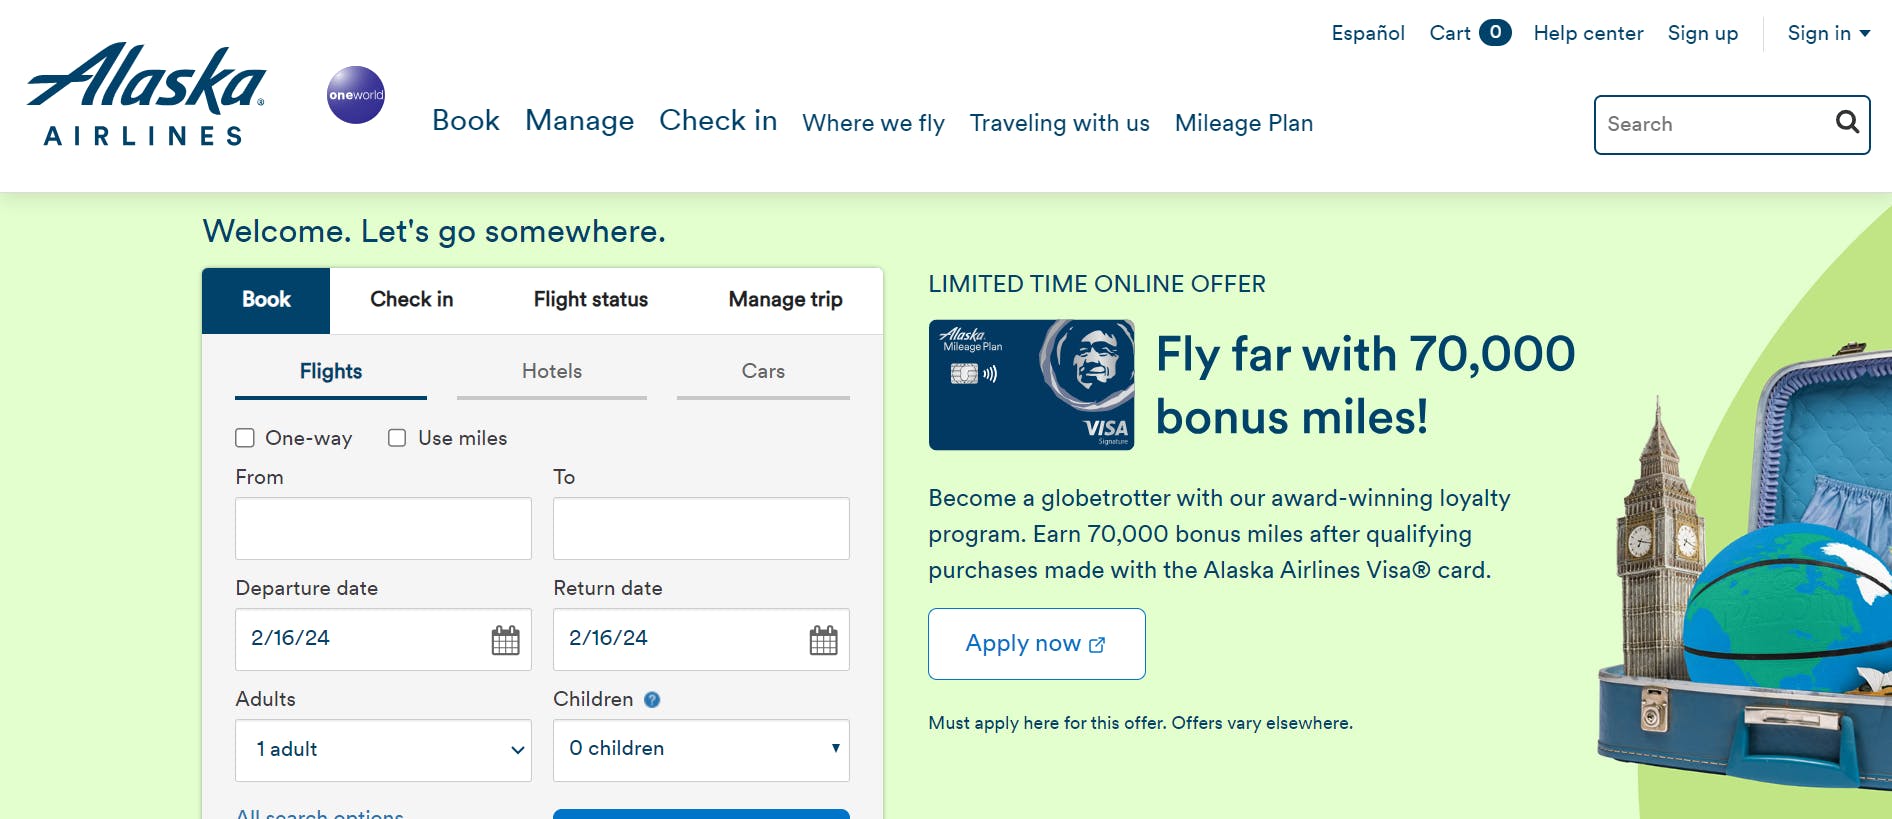 An image of Alaska Airlines landing page.